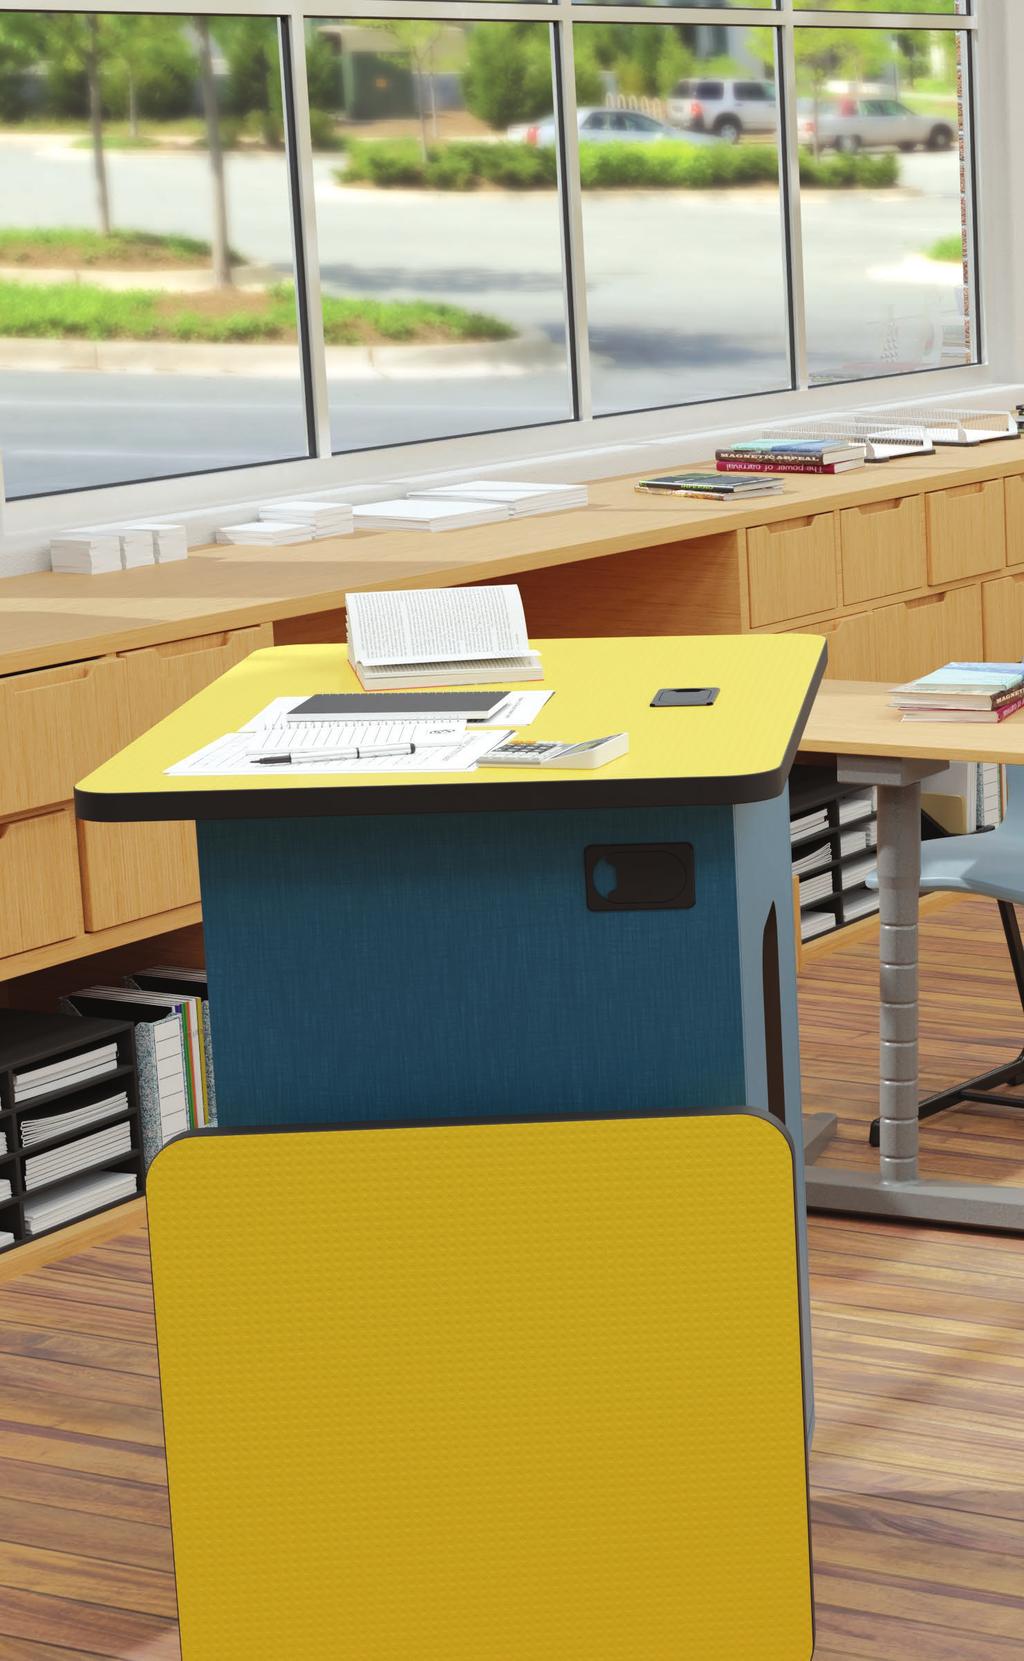 The Opti+ Philosophy Opti+ is an innovative line of student chairs and desks founded